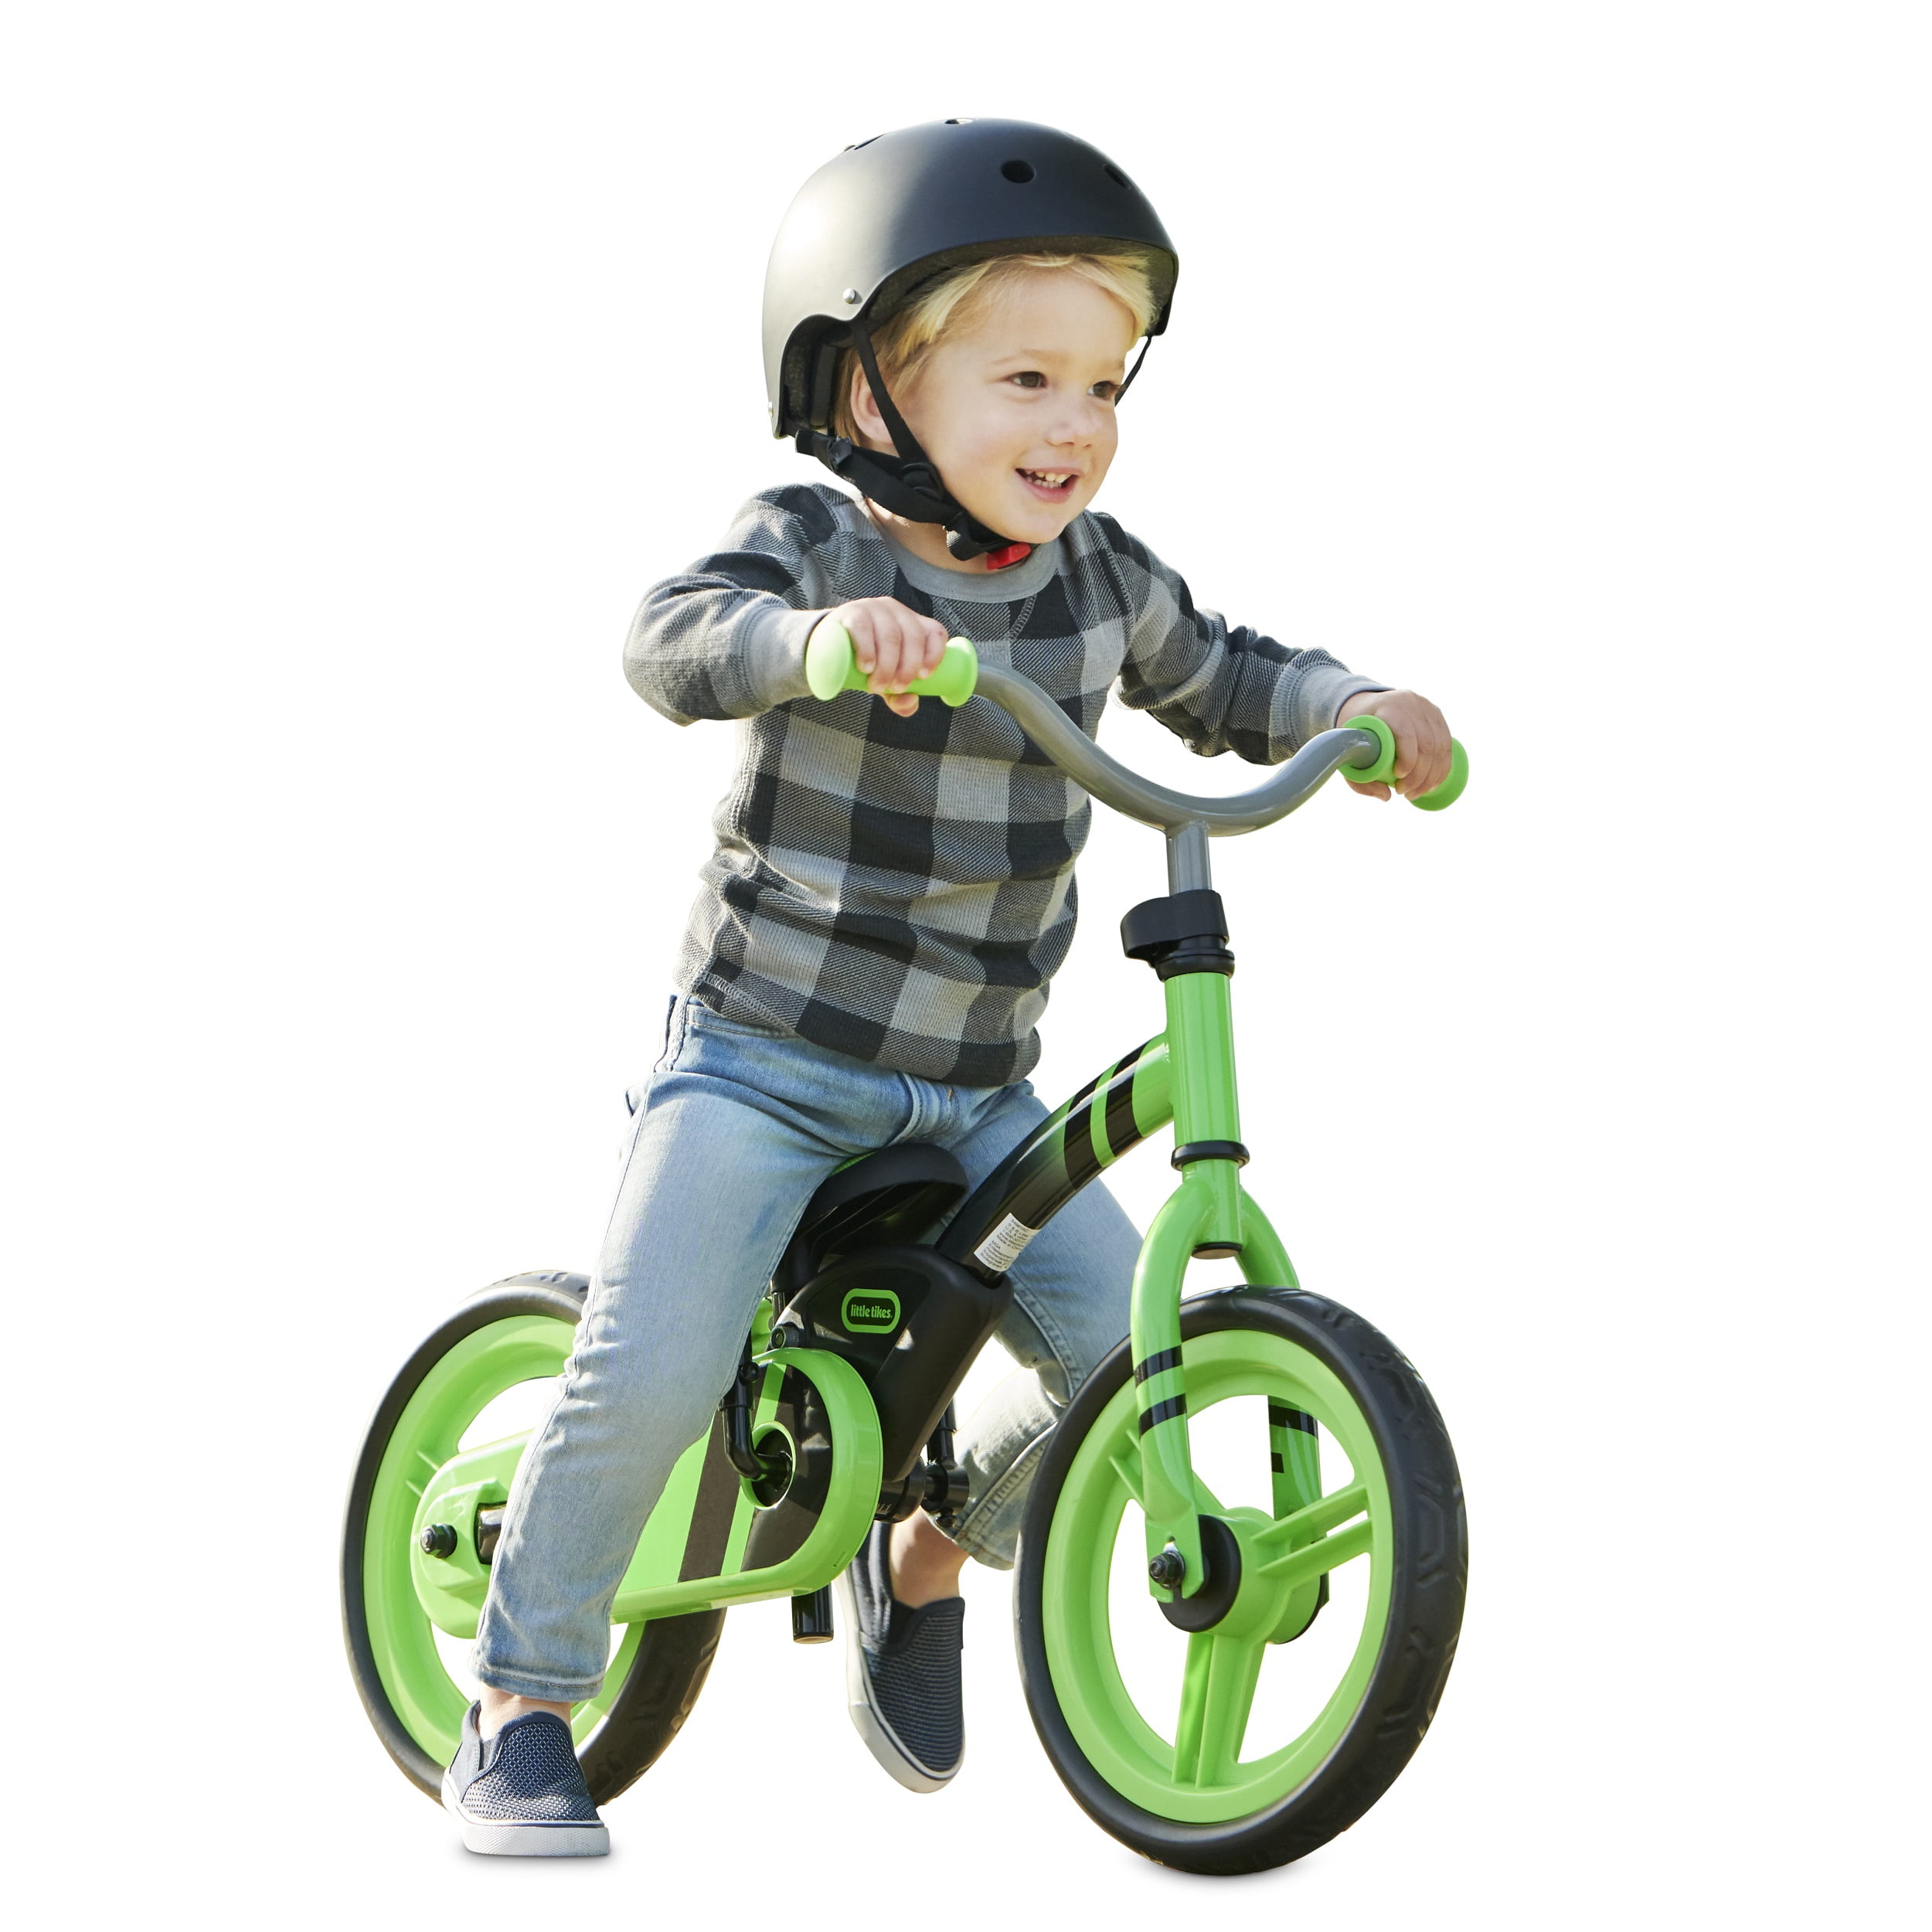 12'' Kids Balance Bike No Pedal Bicycle Ride Scooter Toys Gift Children Training 